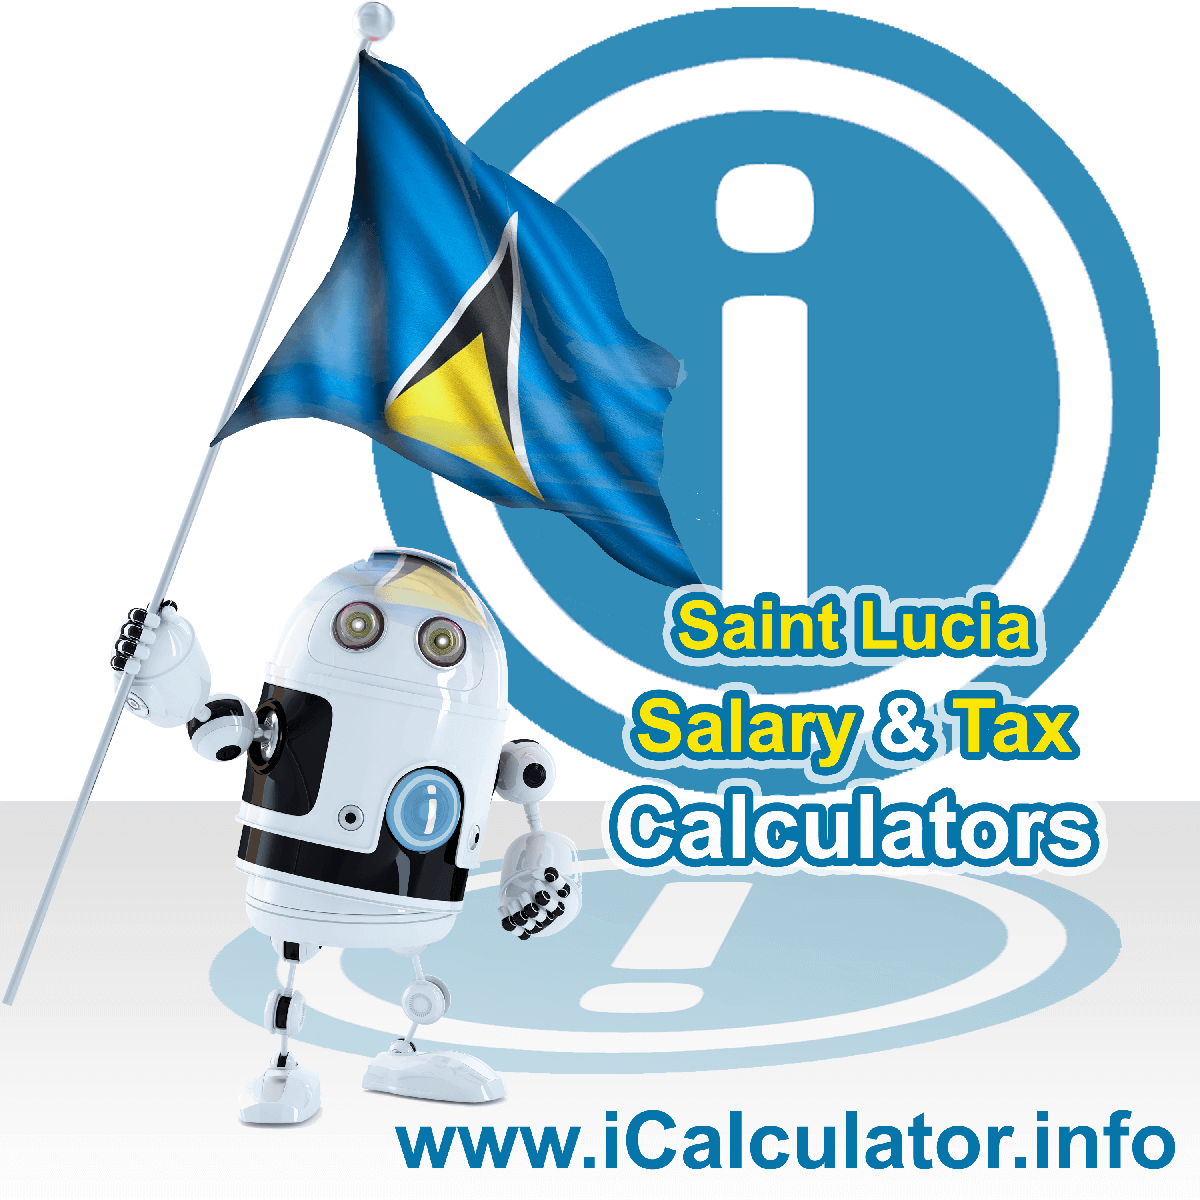 Saint Lucia Tax Calculator. This image shows the Saint Lucia flag and information relating to the tax formula for the Saint Lucia Salary Calculator